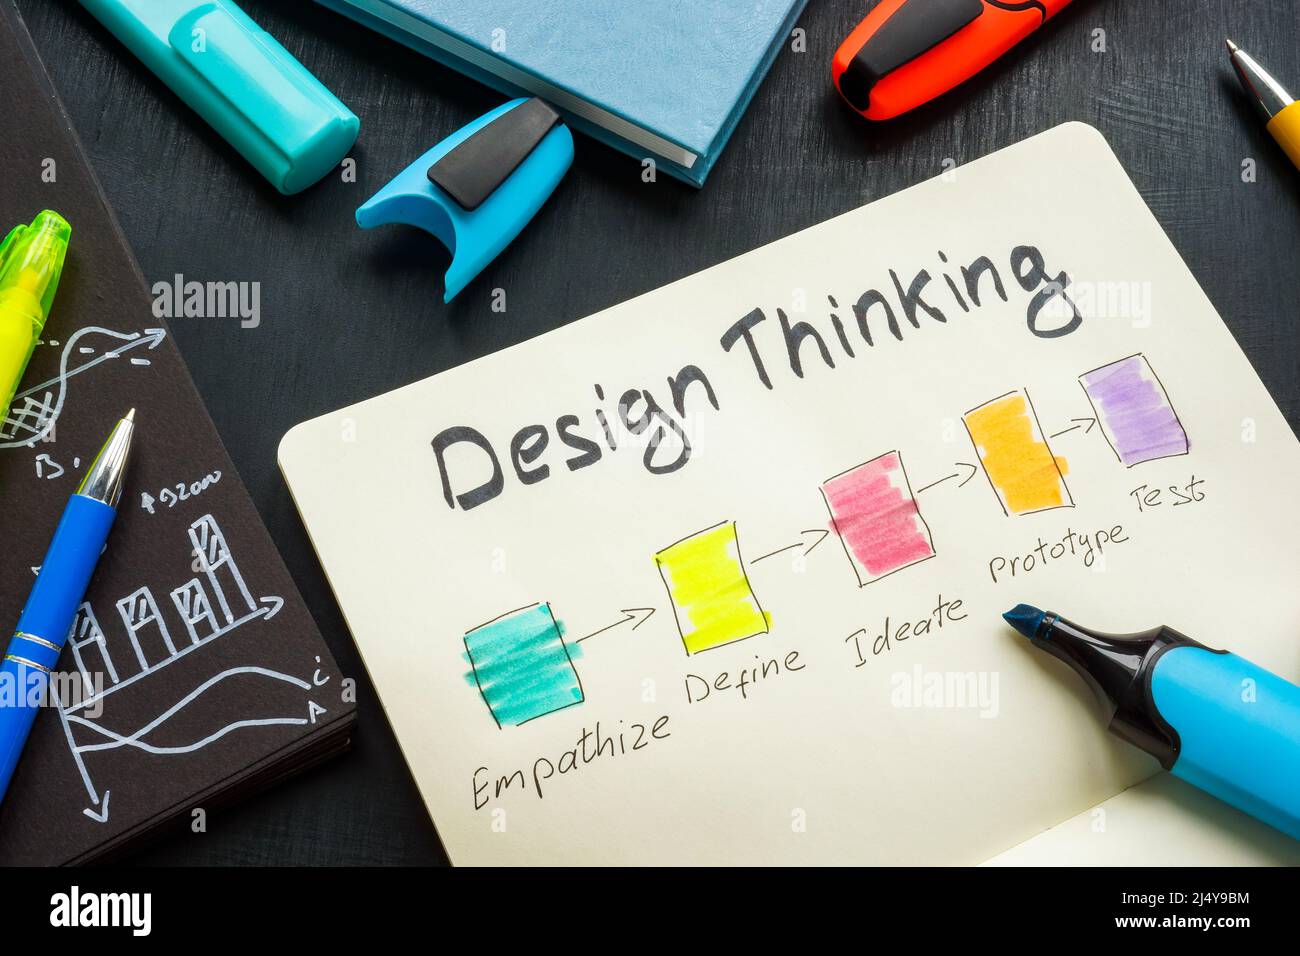 Stages of design thinking in the open notepad. Stock Photo